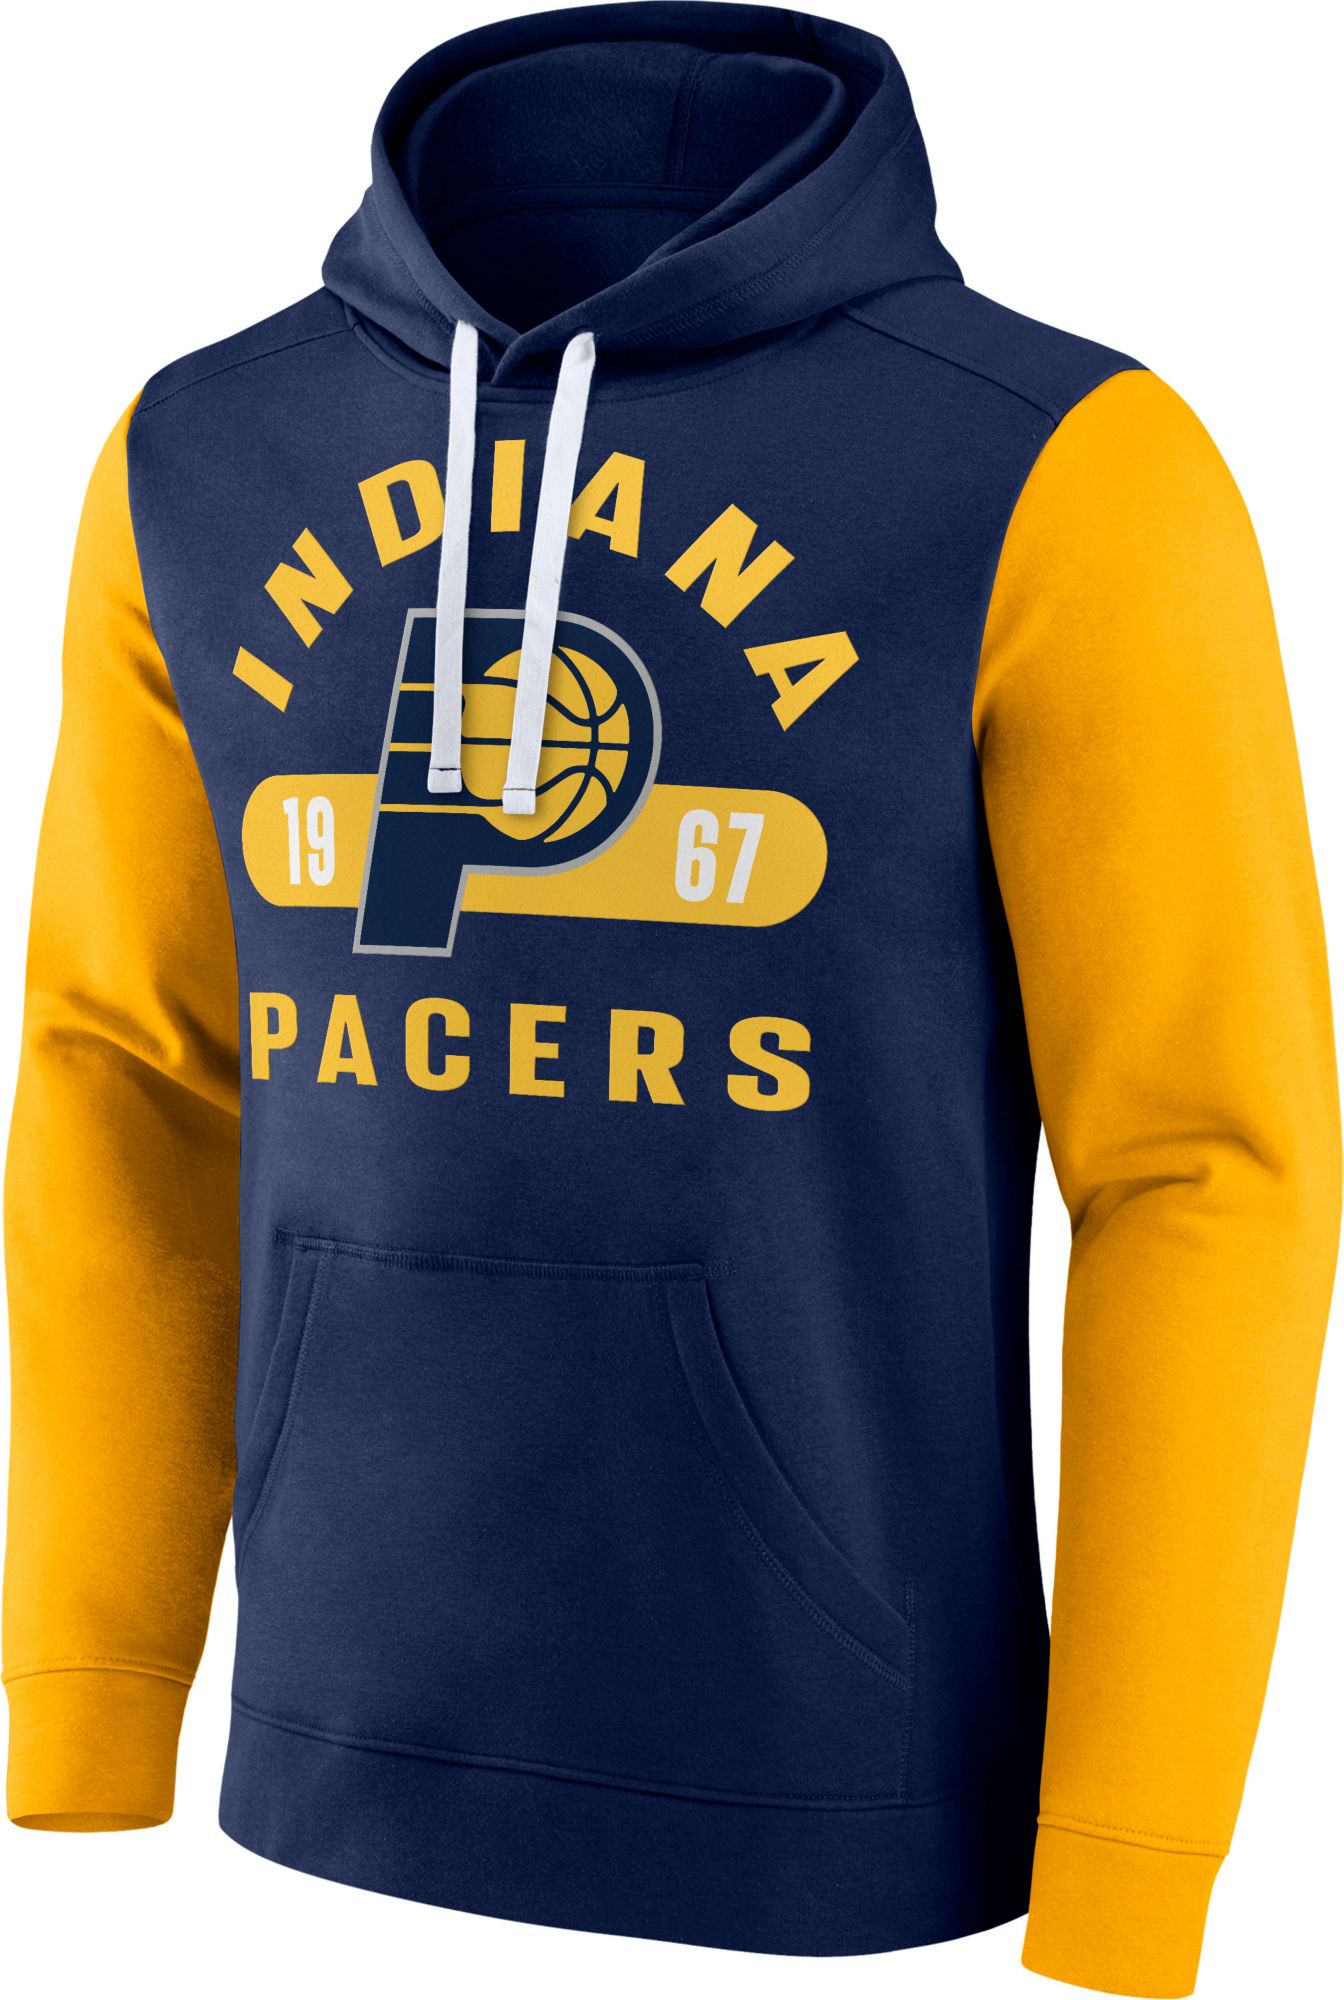 Adult Indiana Pacers #00 Bennedict Mathurin Icon Swingman Jersey by Nike